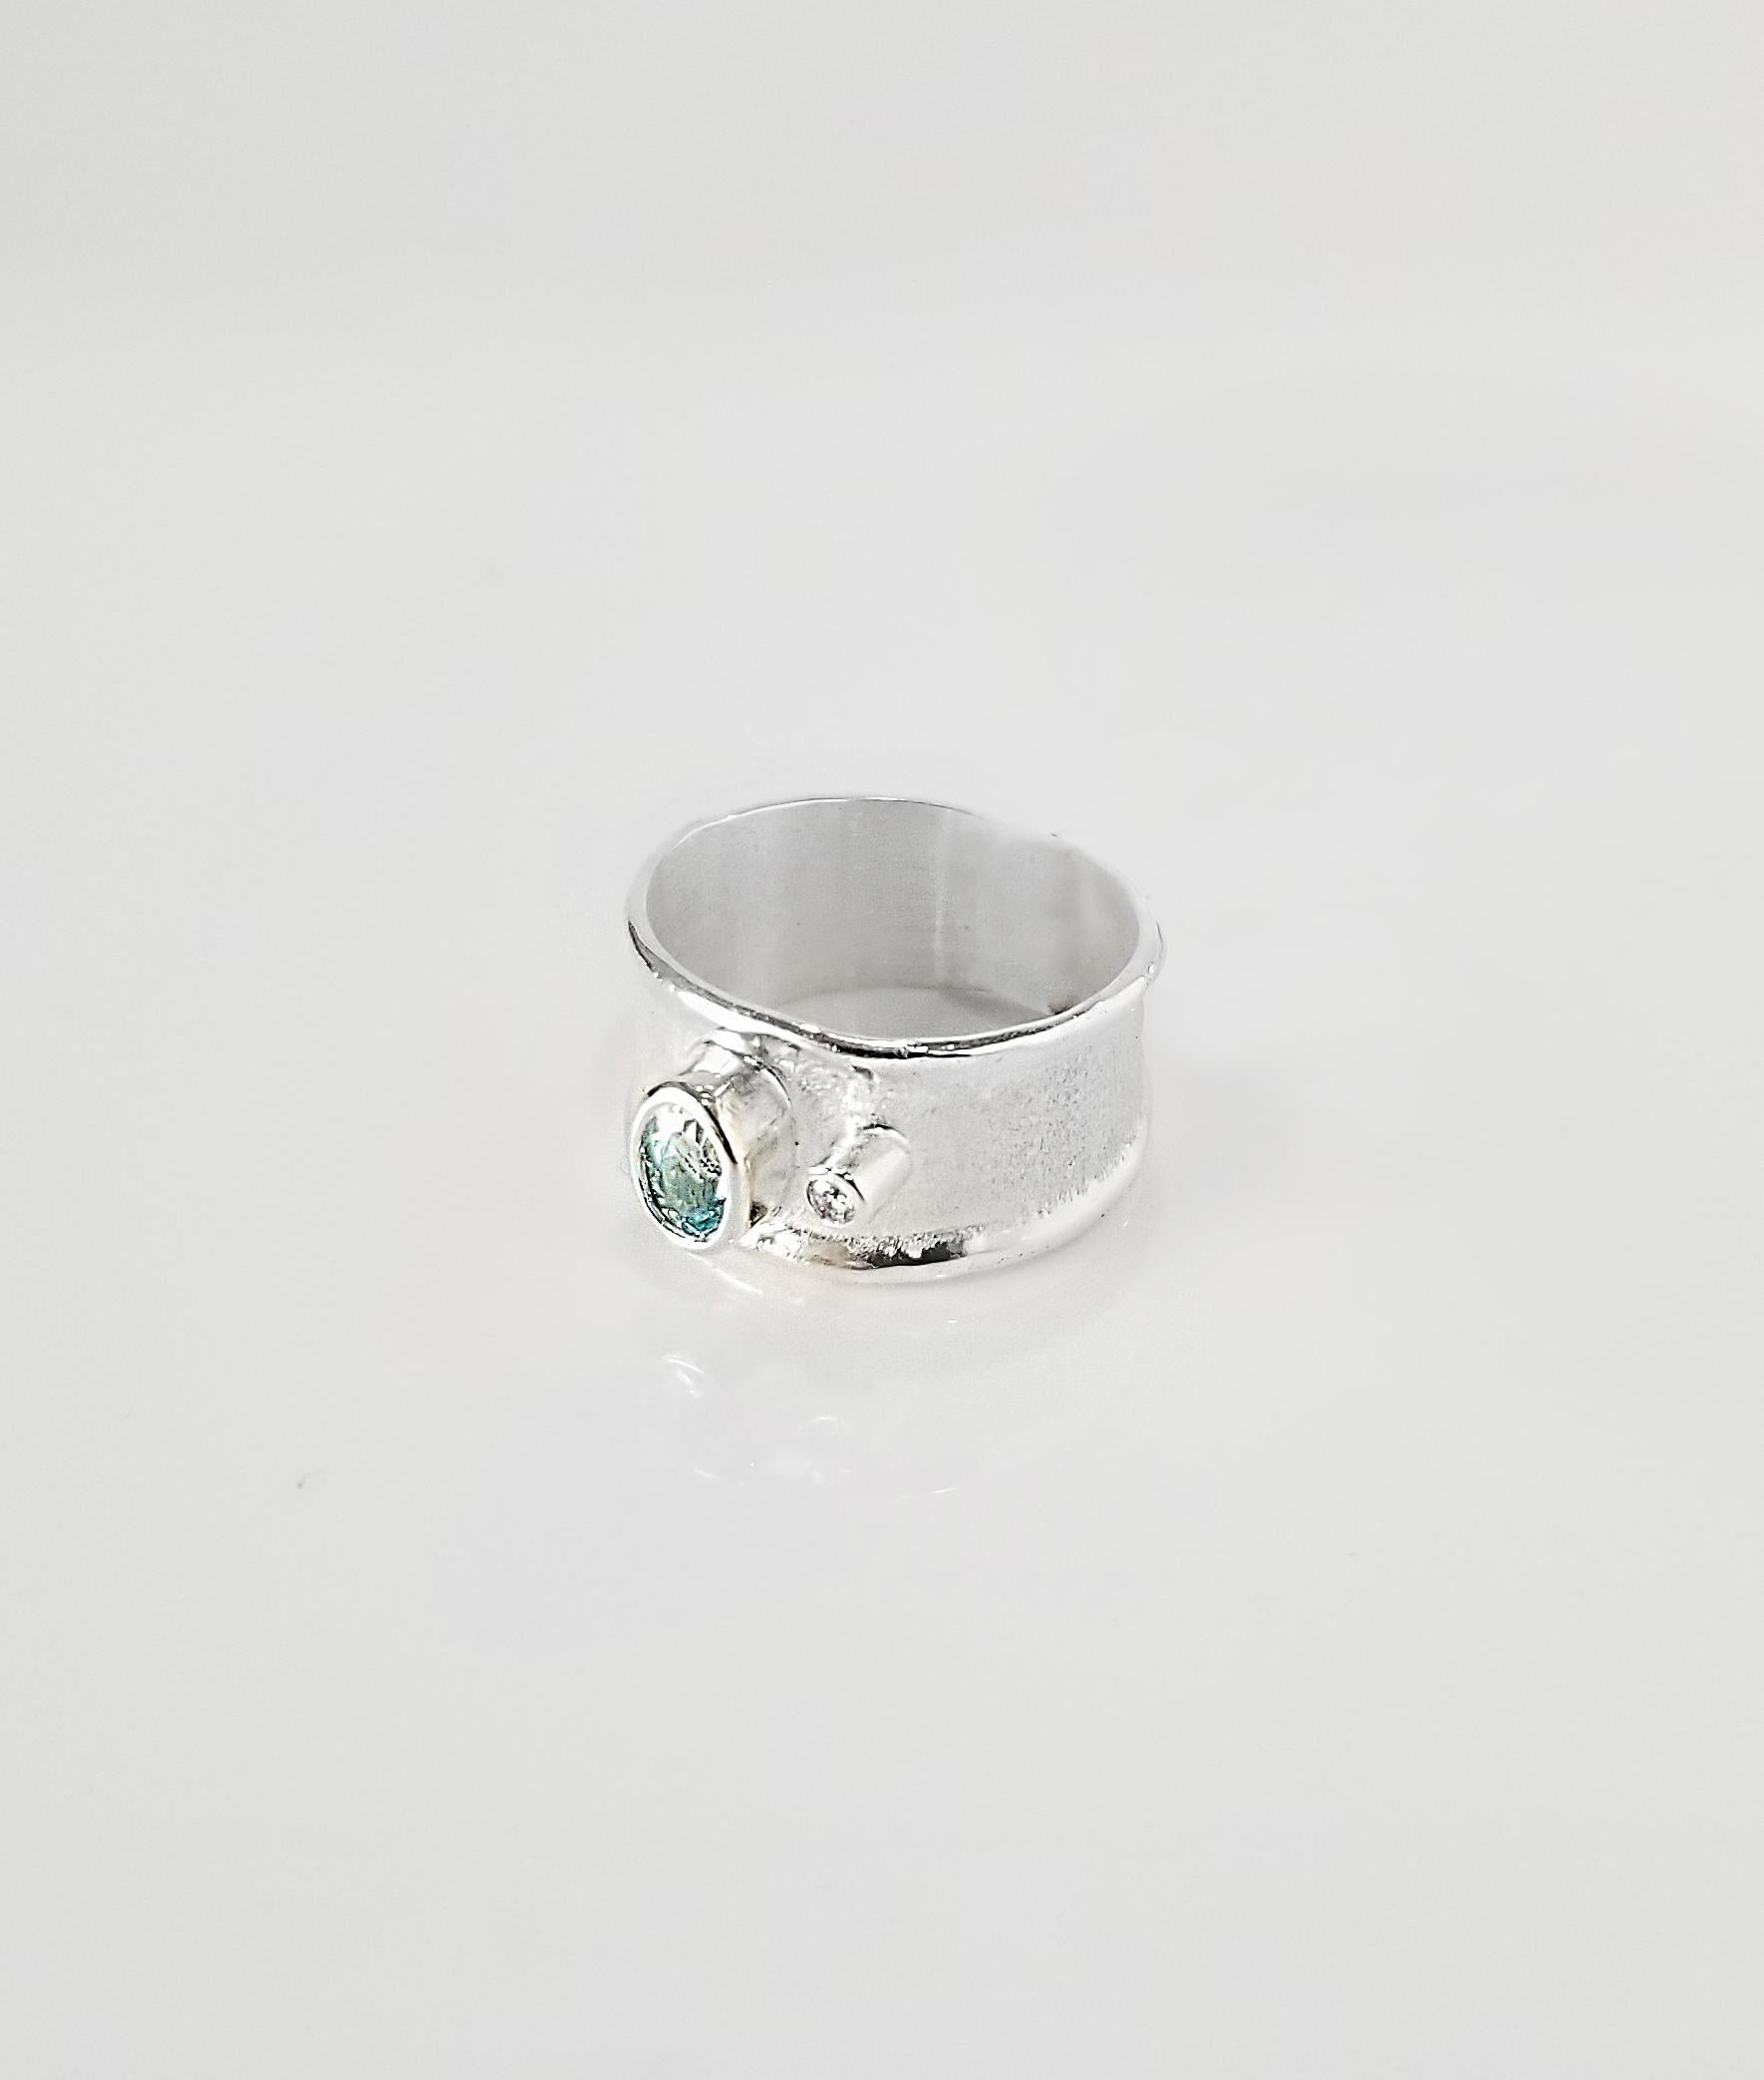 Yianni Creations fine silver artisan ring from Ammos Collection featuring 0.40 Carat aquamarine accompanied by 0.03 Carat brilliant-cut white diamond. The unique look of this simplified band is created by ancient techniques of craftsmanship -